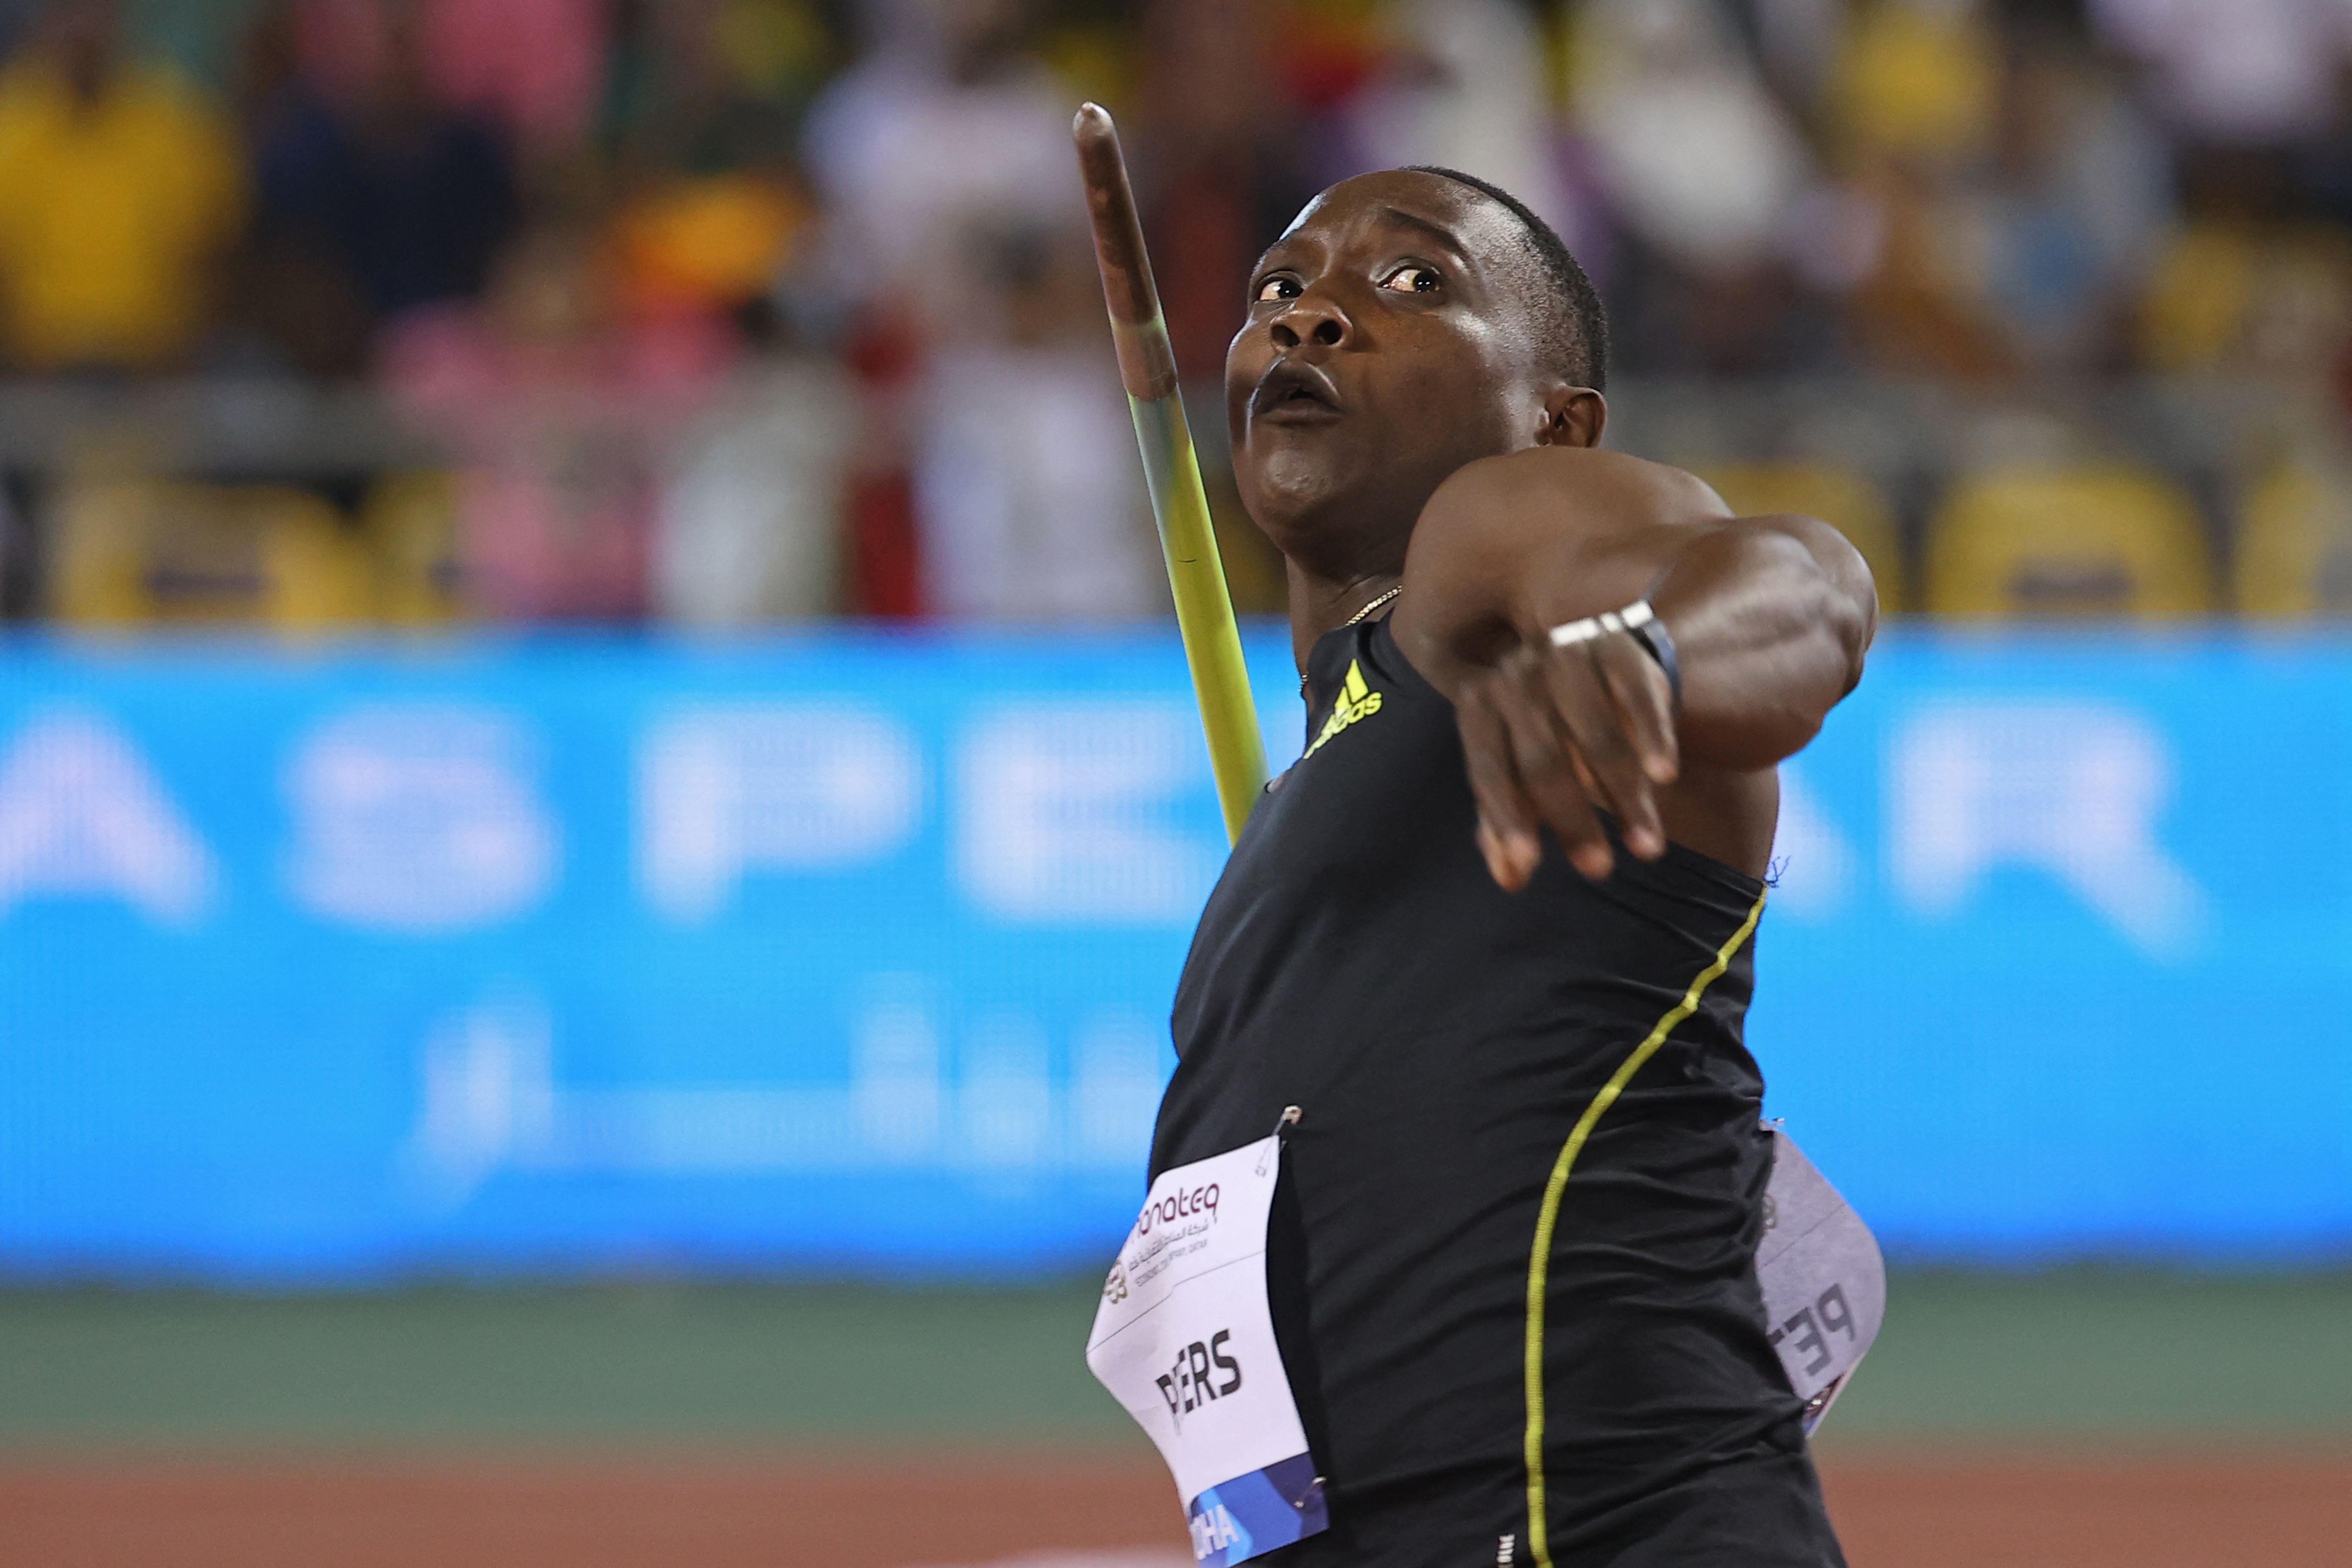 Anderson Peters in action at the Wanda Diamond League meeting in Doha